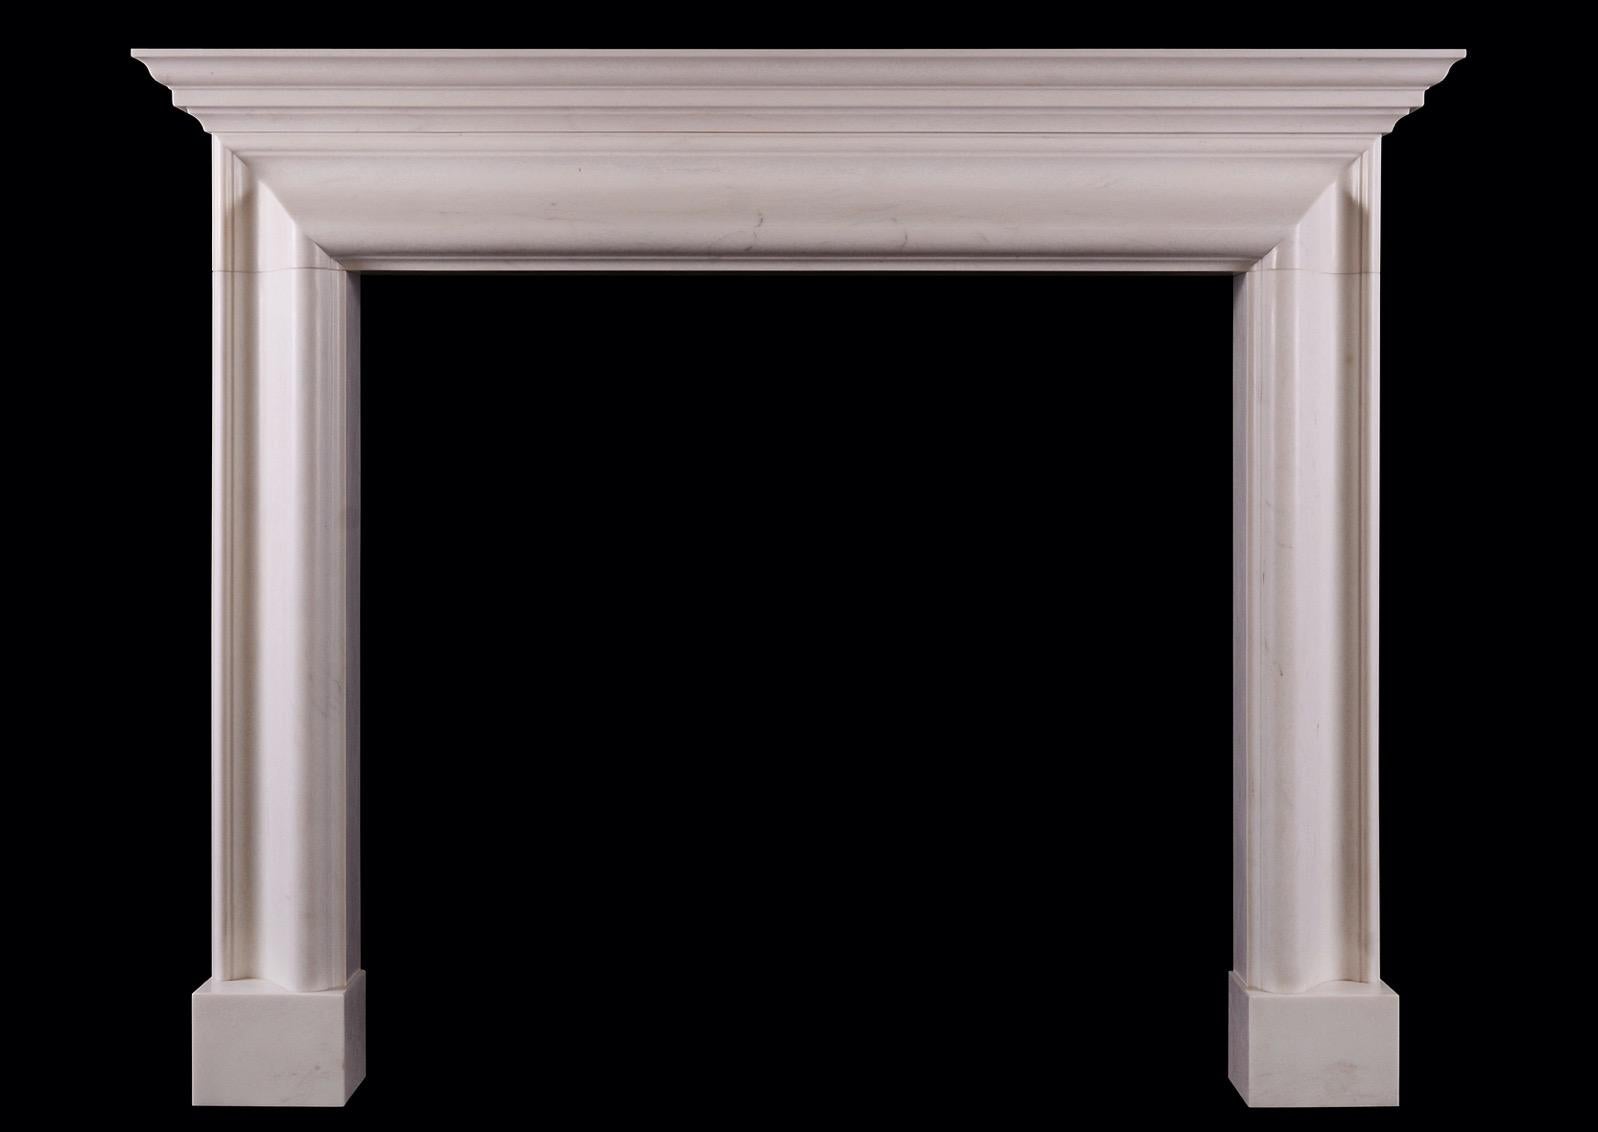 An English bolection fireplace with moulded shelf above. Shown in white marble, could be made in other marbles or limestones if required. English, modern. N.B. May be subject to an extended lead time, please enquire for more information.

Shelf